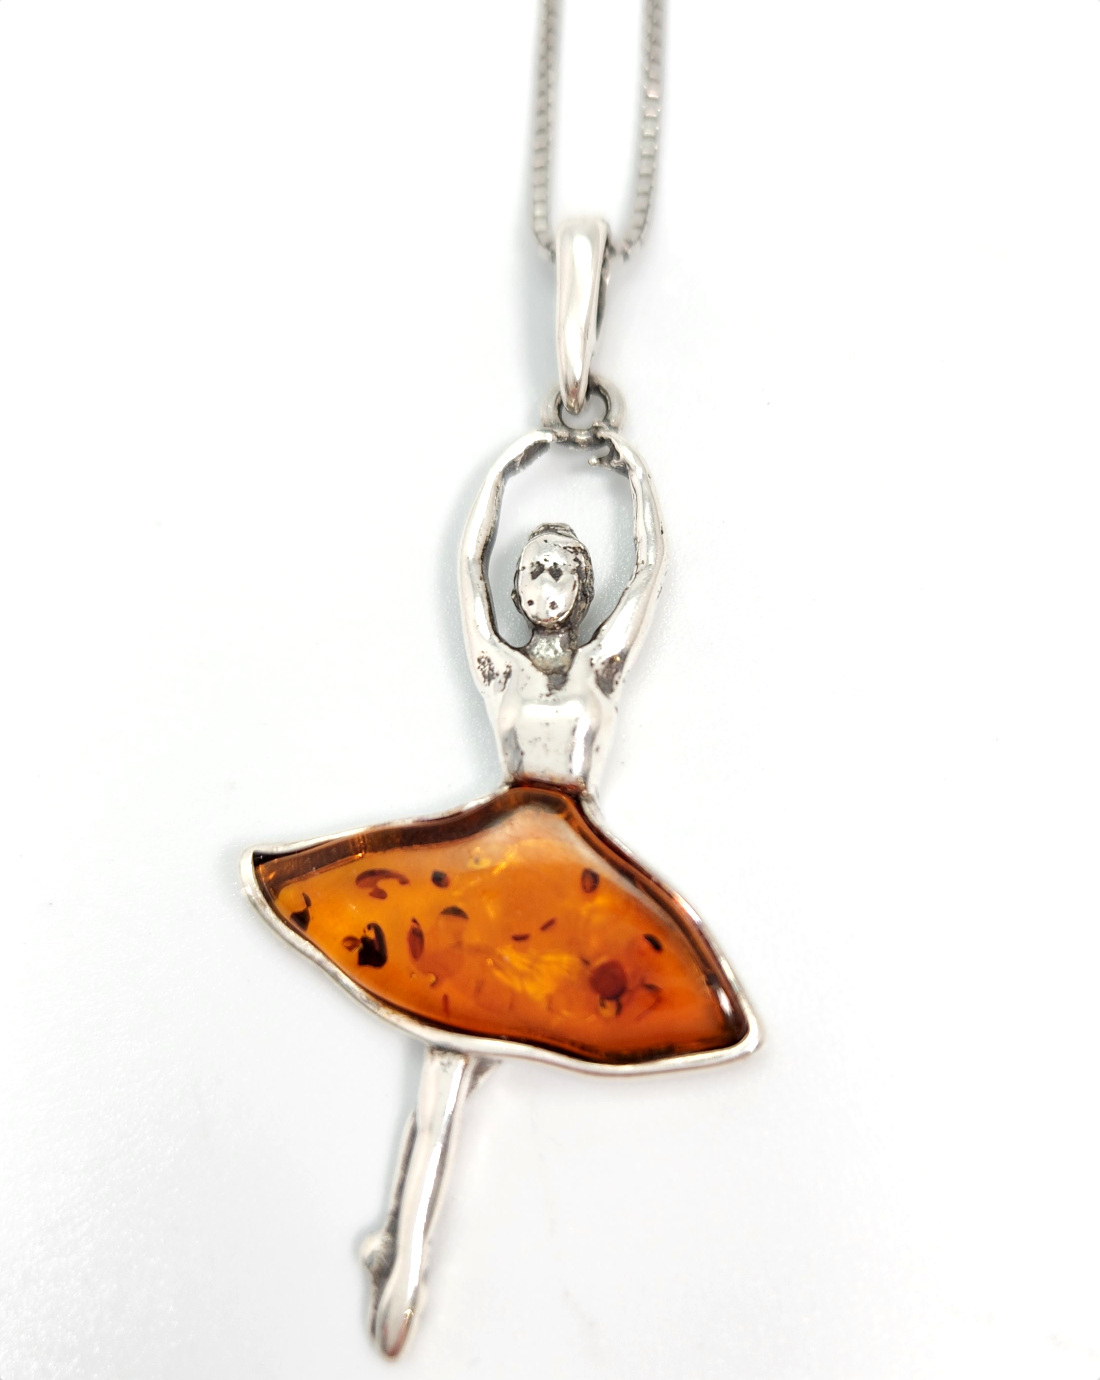 Ballerina necklace made from sterling silver and Baltic amber